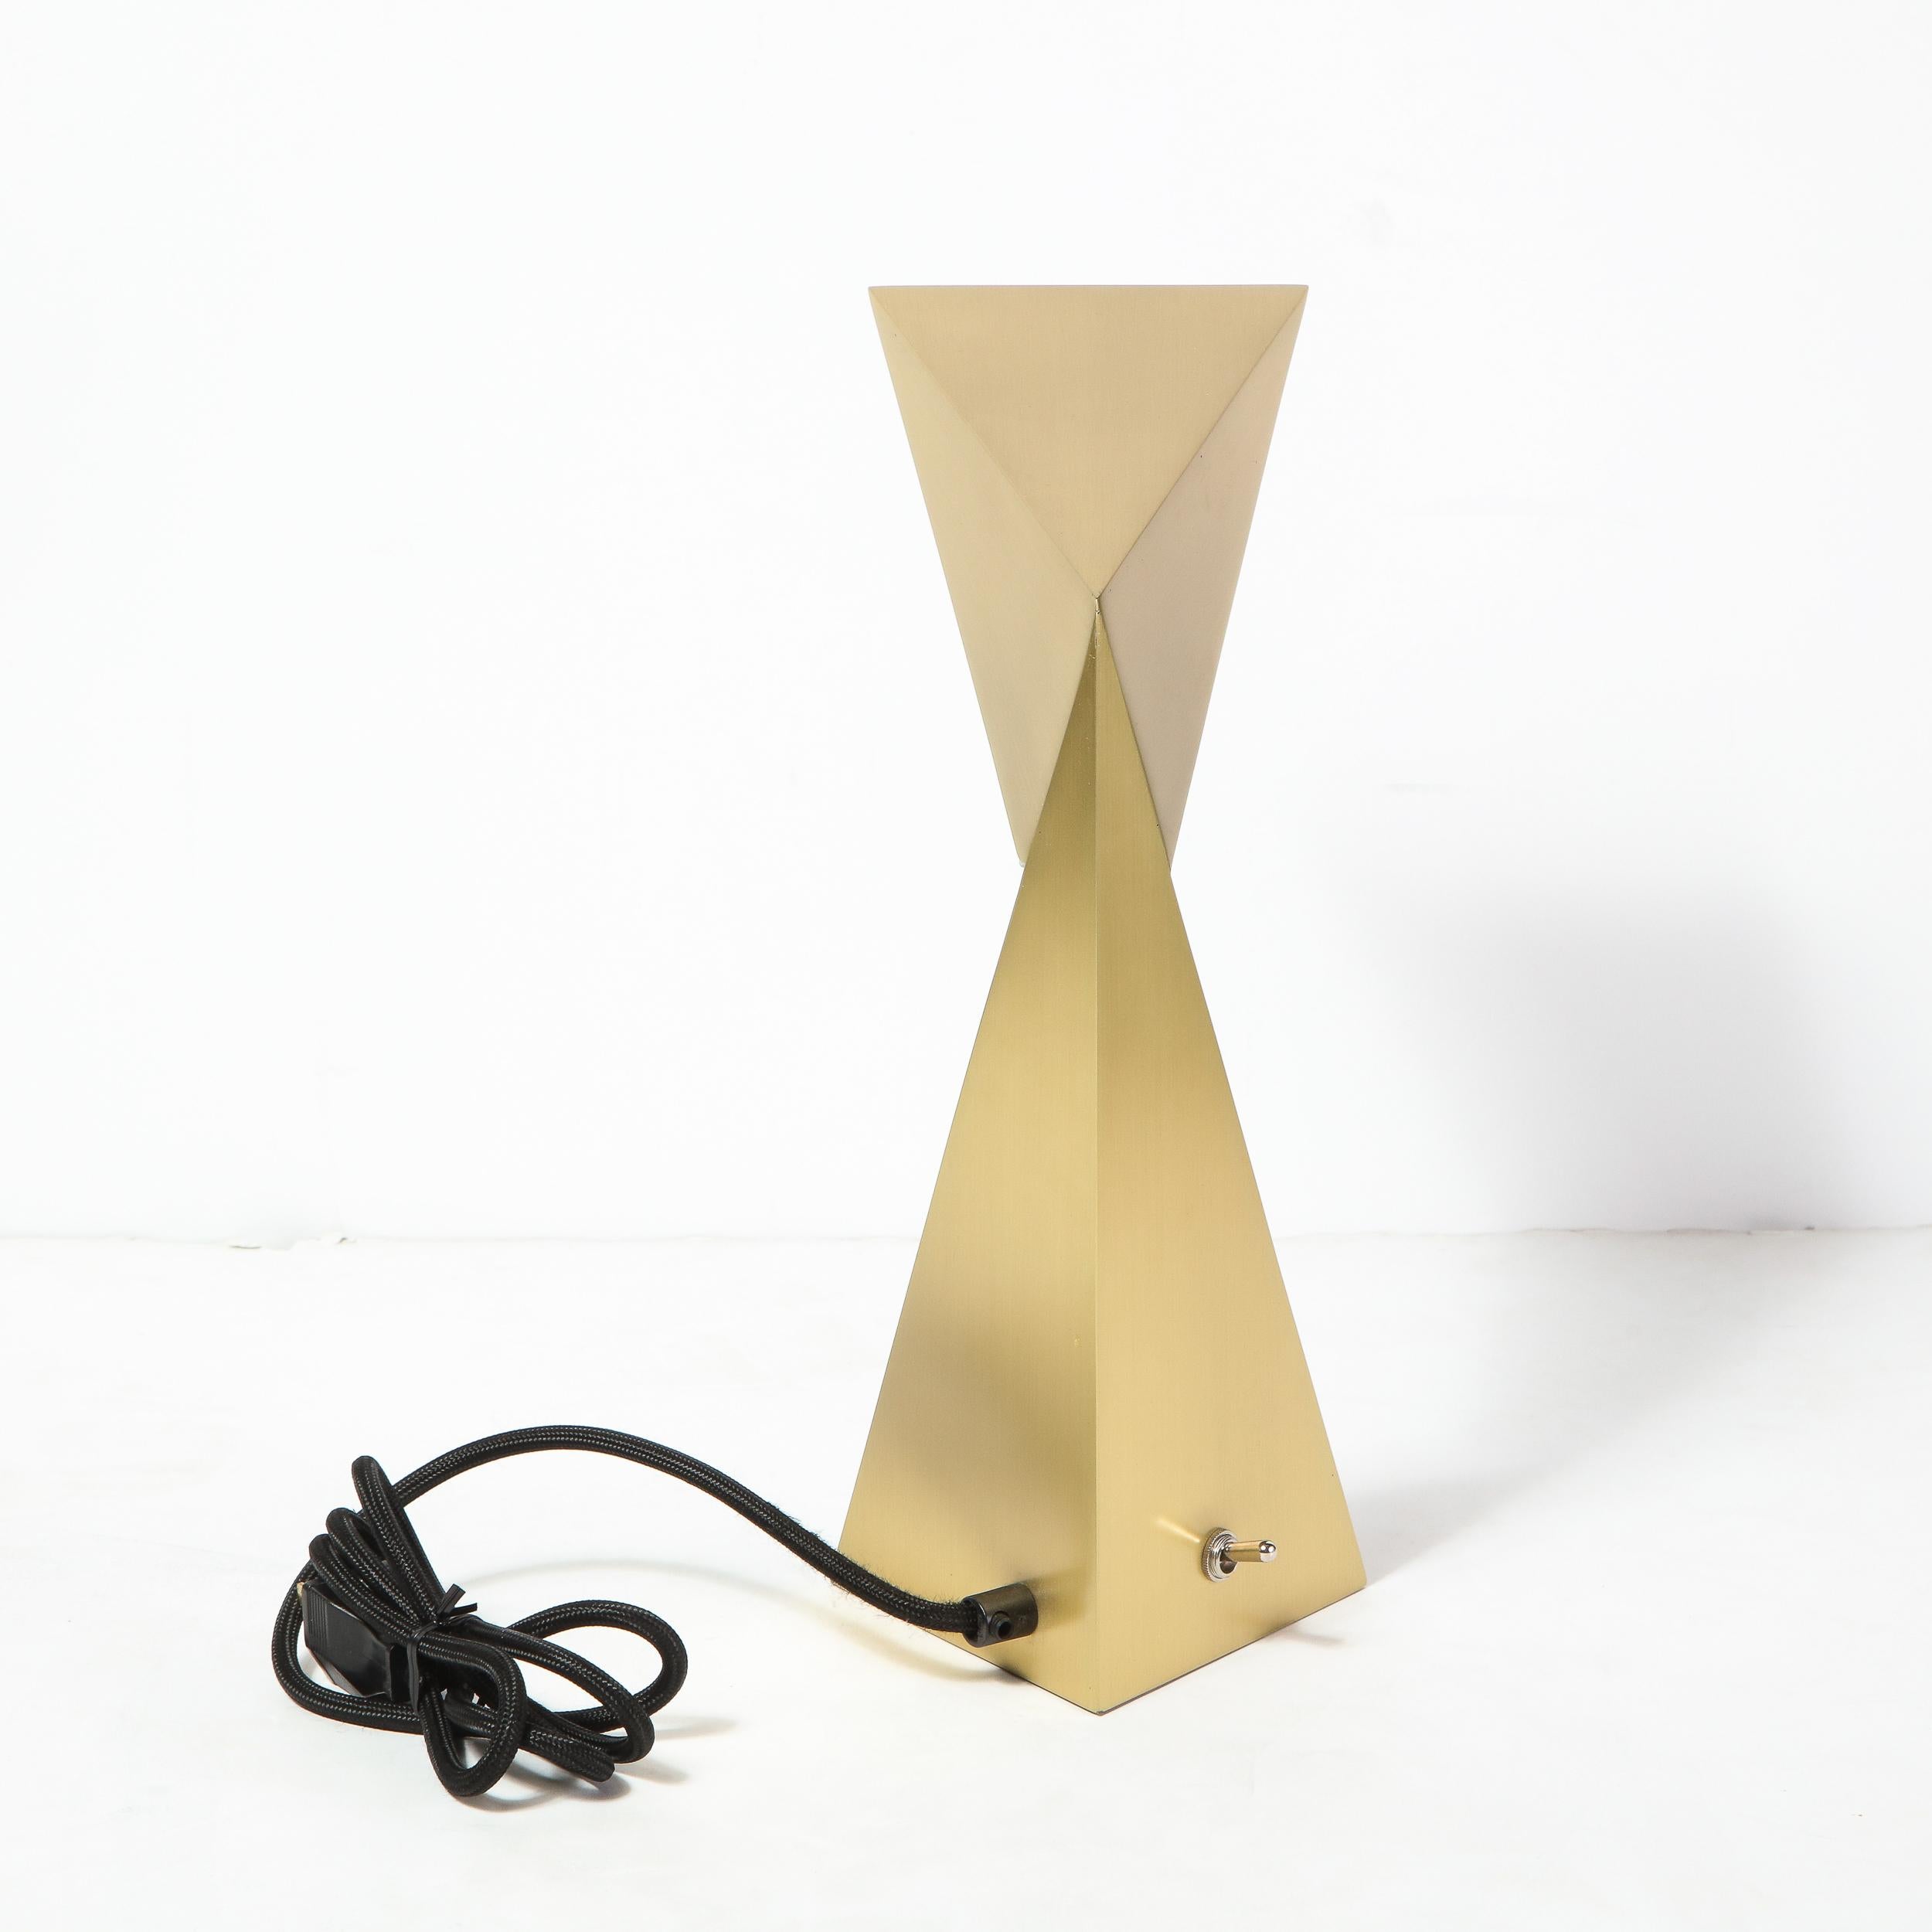 American Modernist Brushed Brass Faceted Futurist Origami Lamp by Pouenat